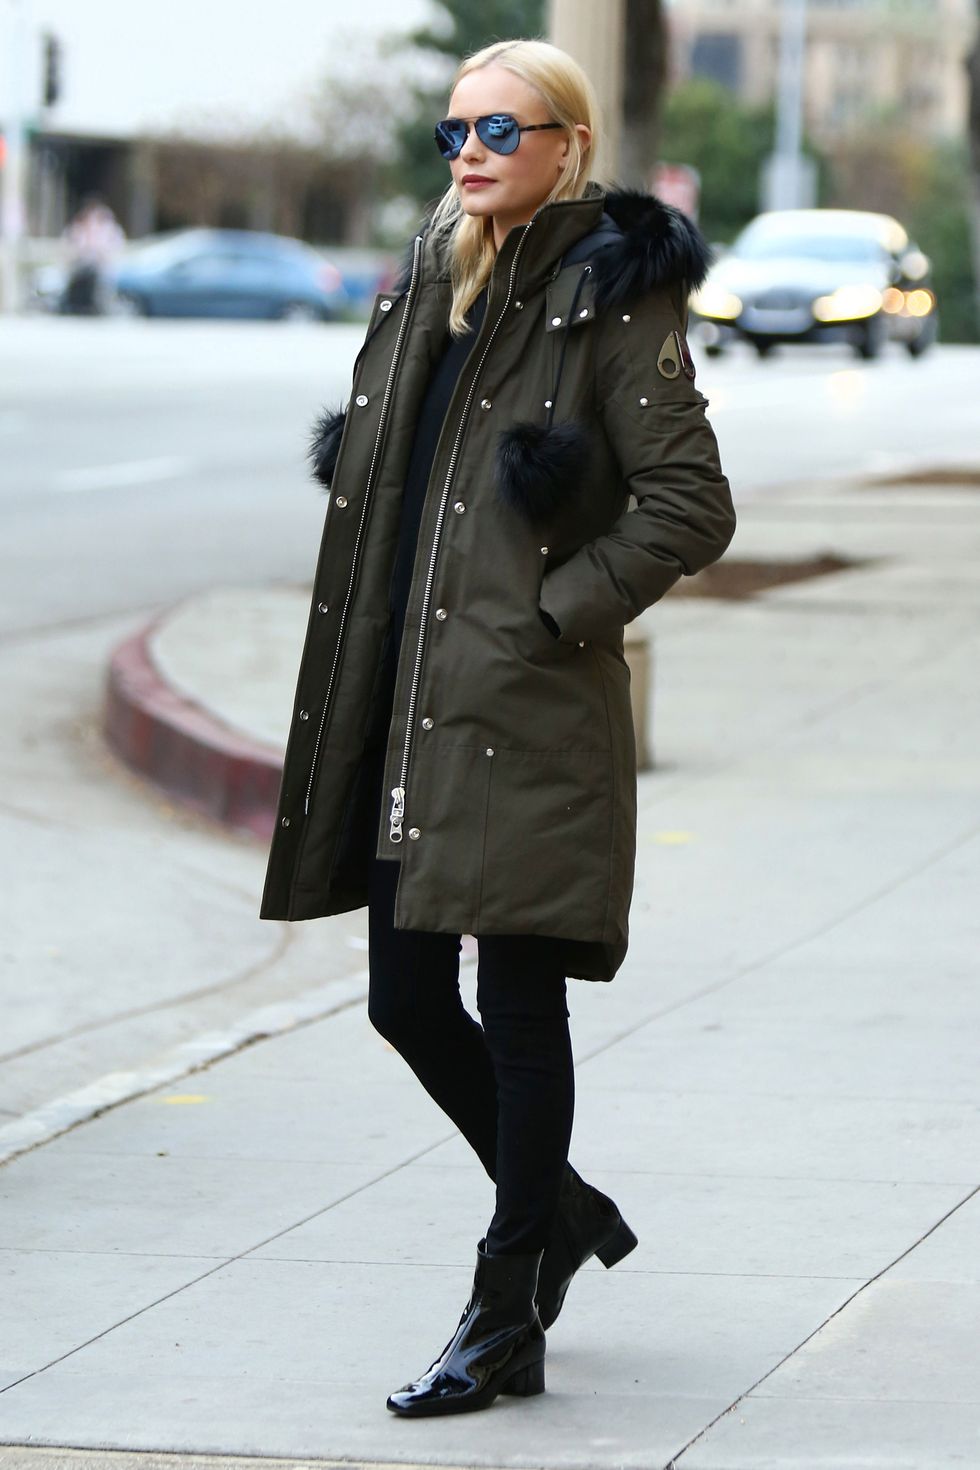 Winter style inspiration from the A-list – Celebrity style